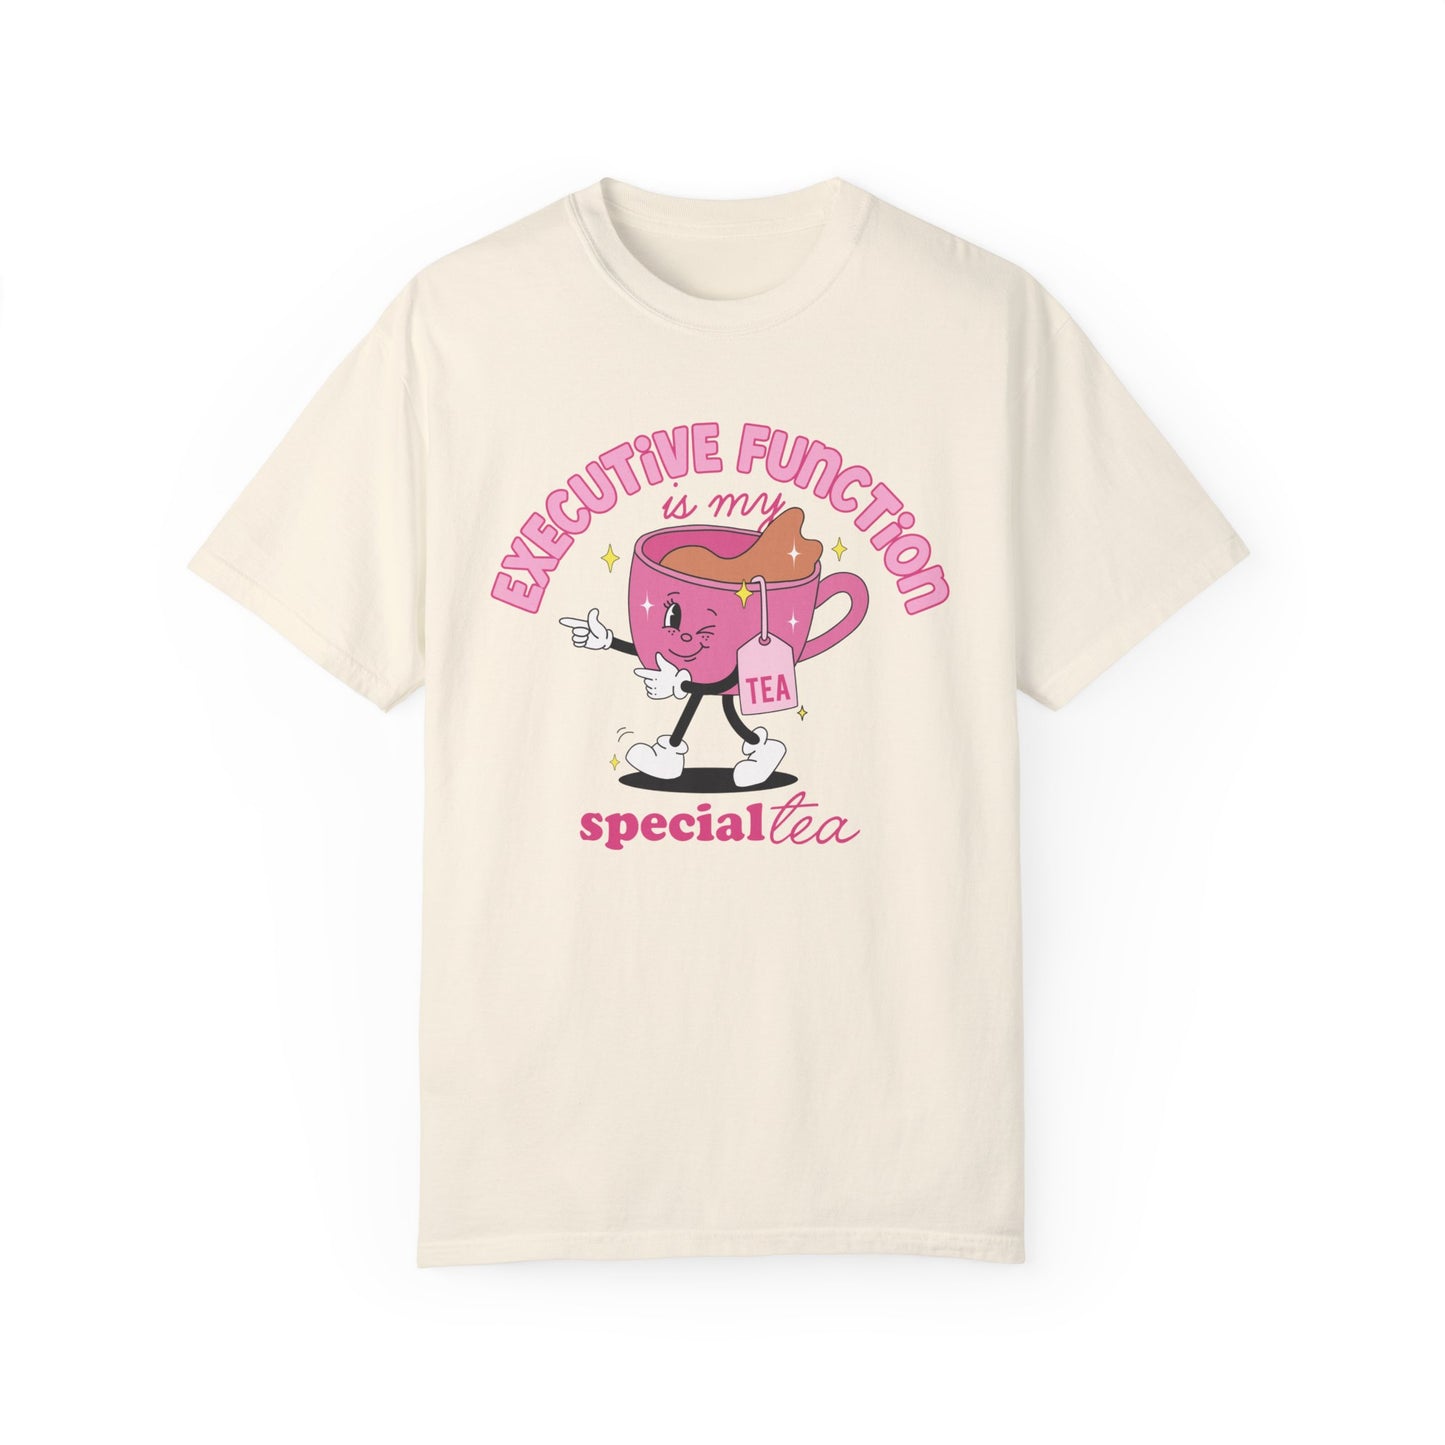 Executive Function is my Specialty Tee